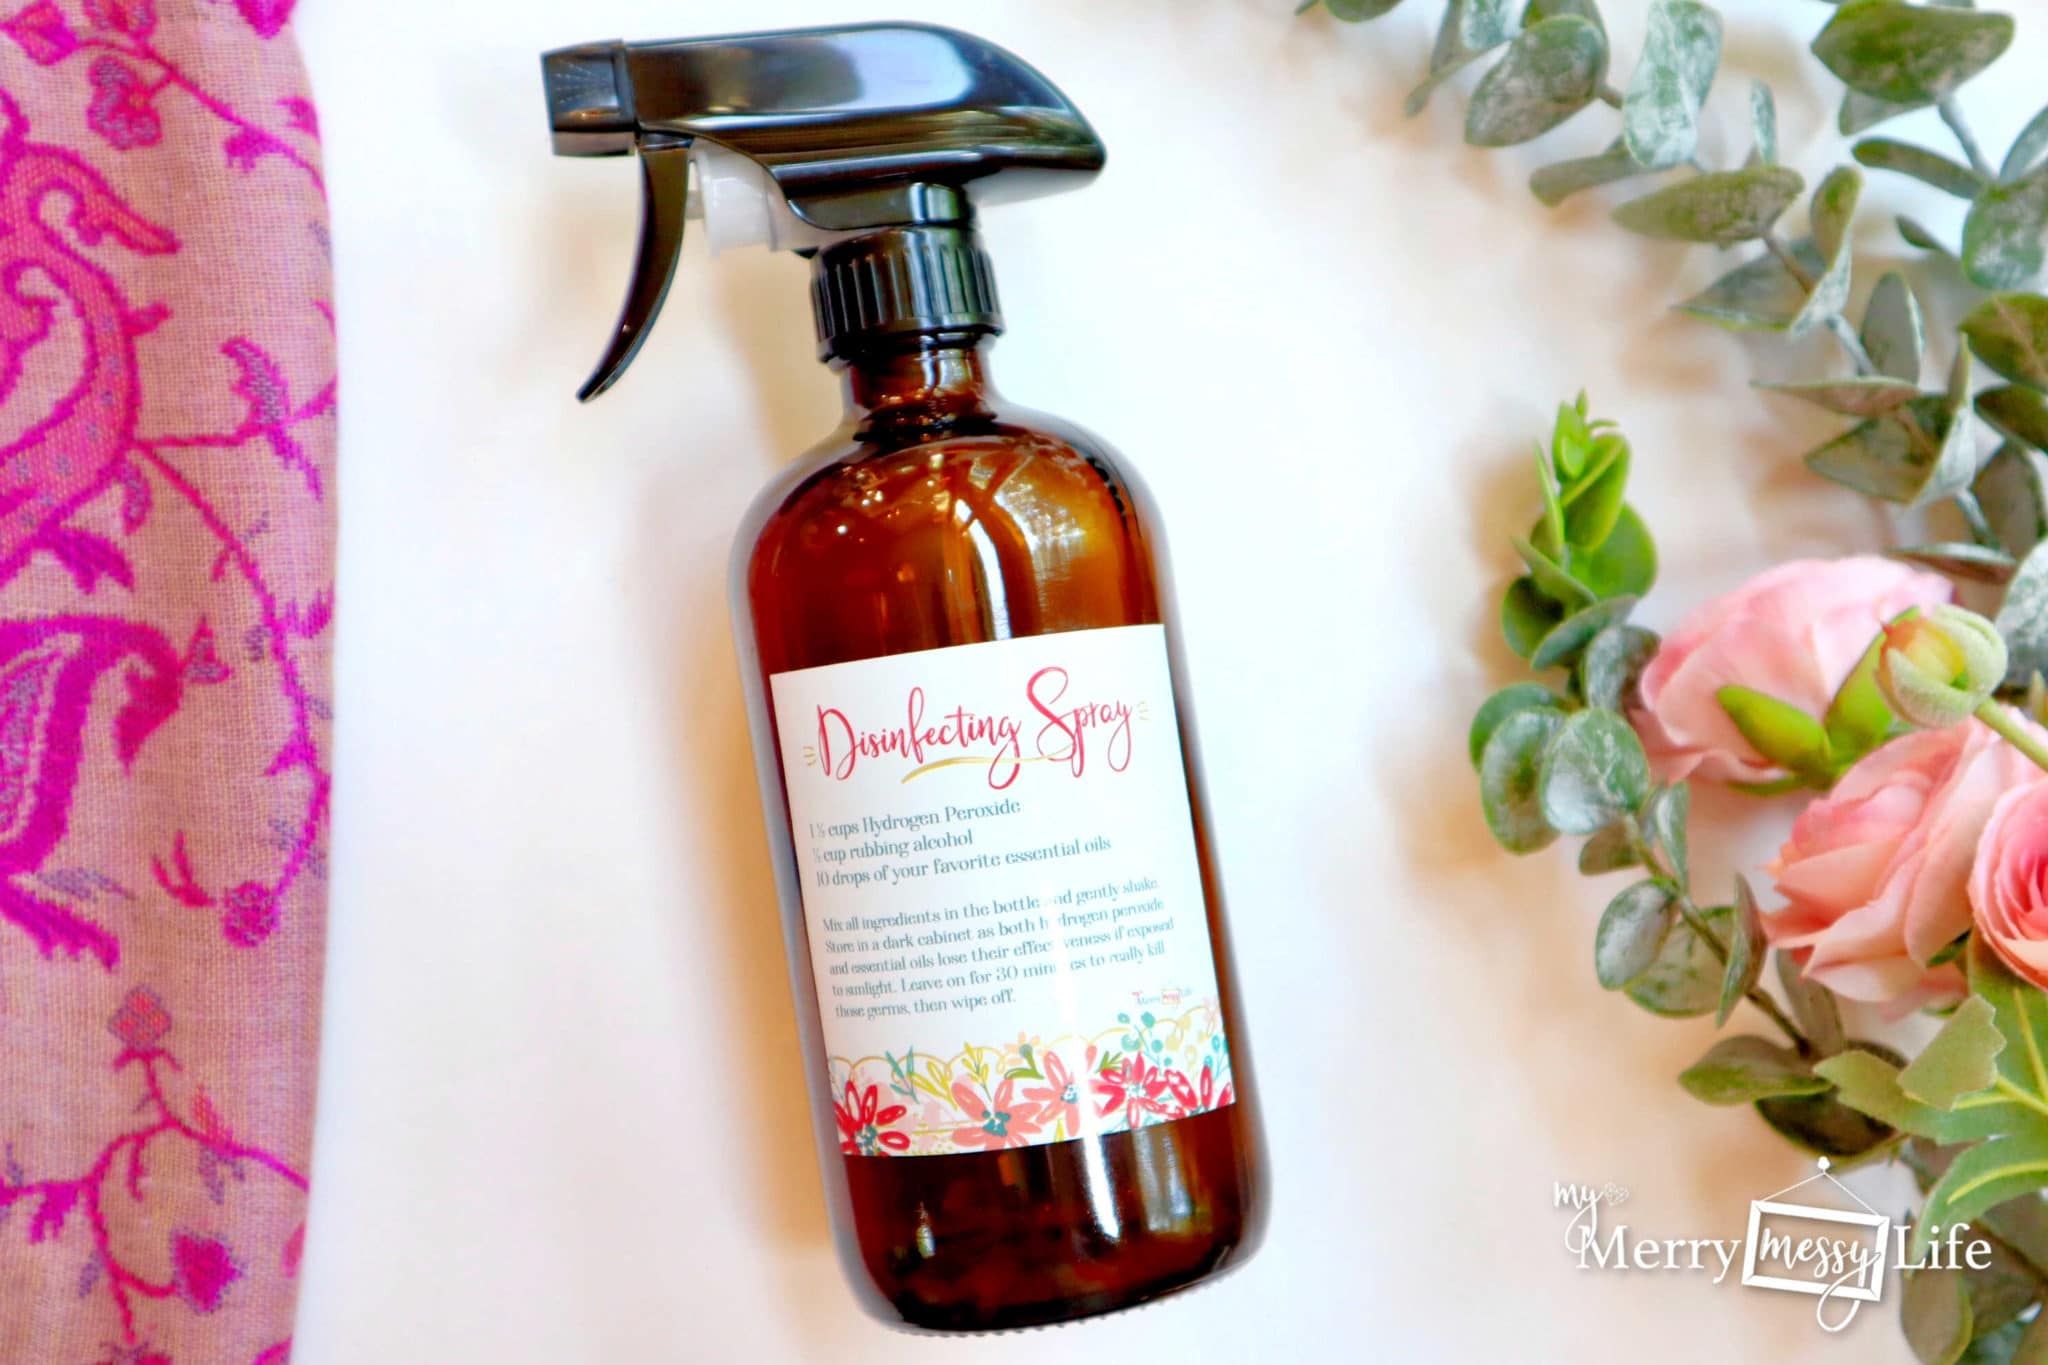 All Natural DIY Disinfecting Spray Recipe using Vinegar, Hydrogen Peroxide and Essential Oils